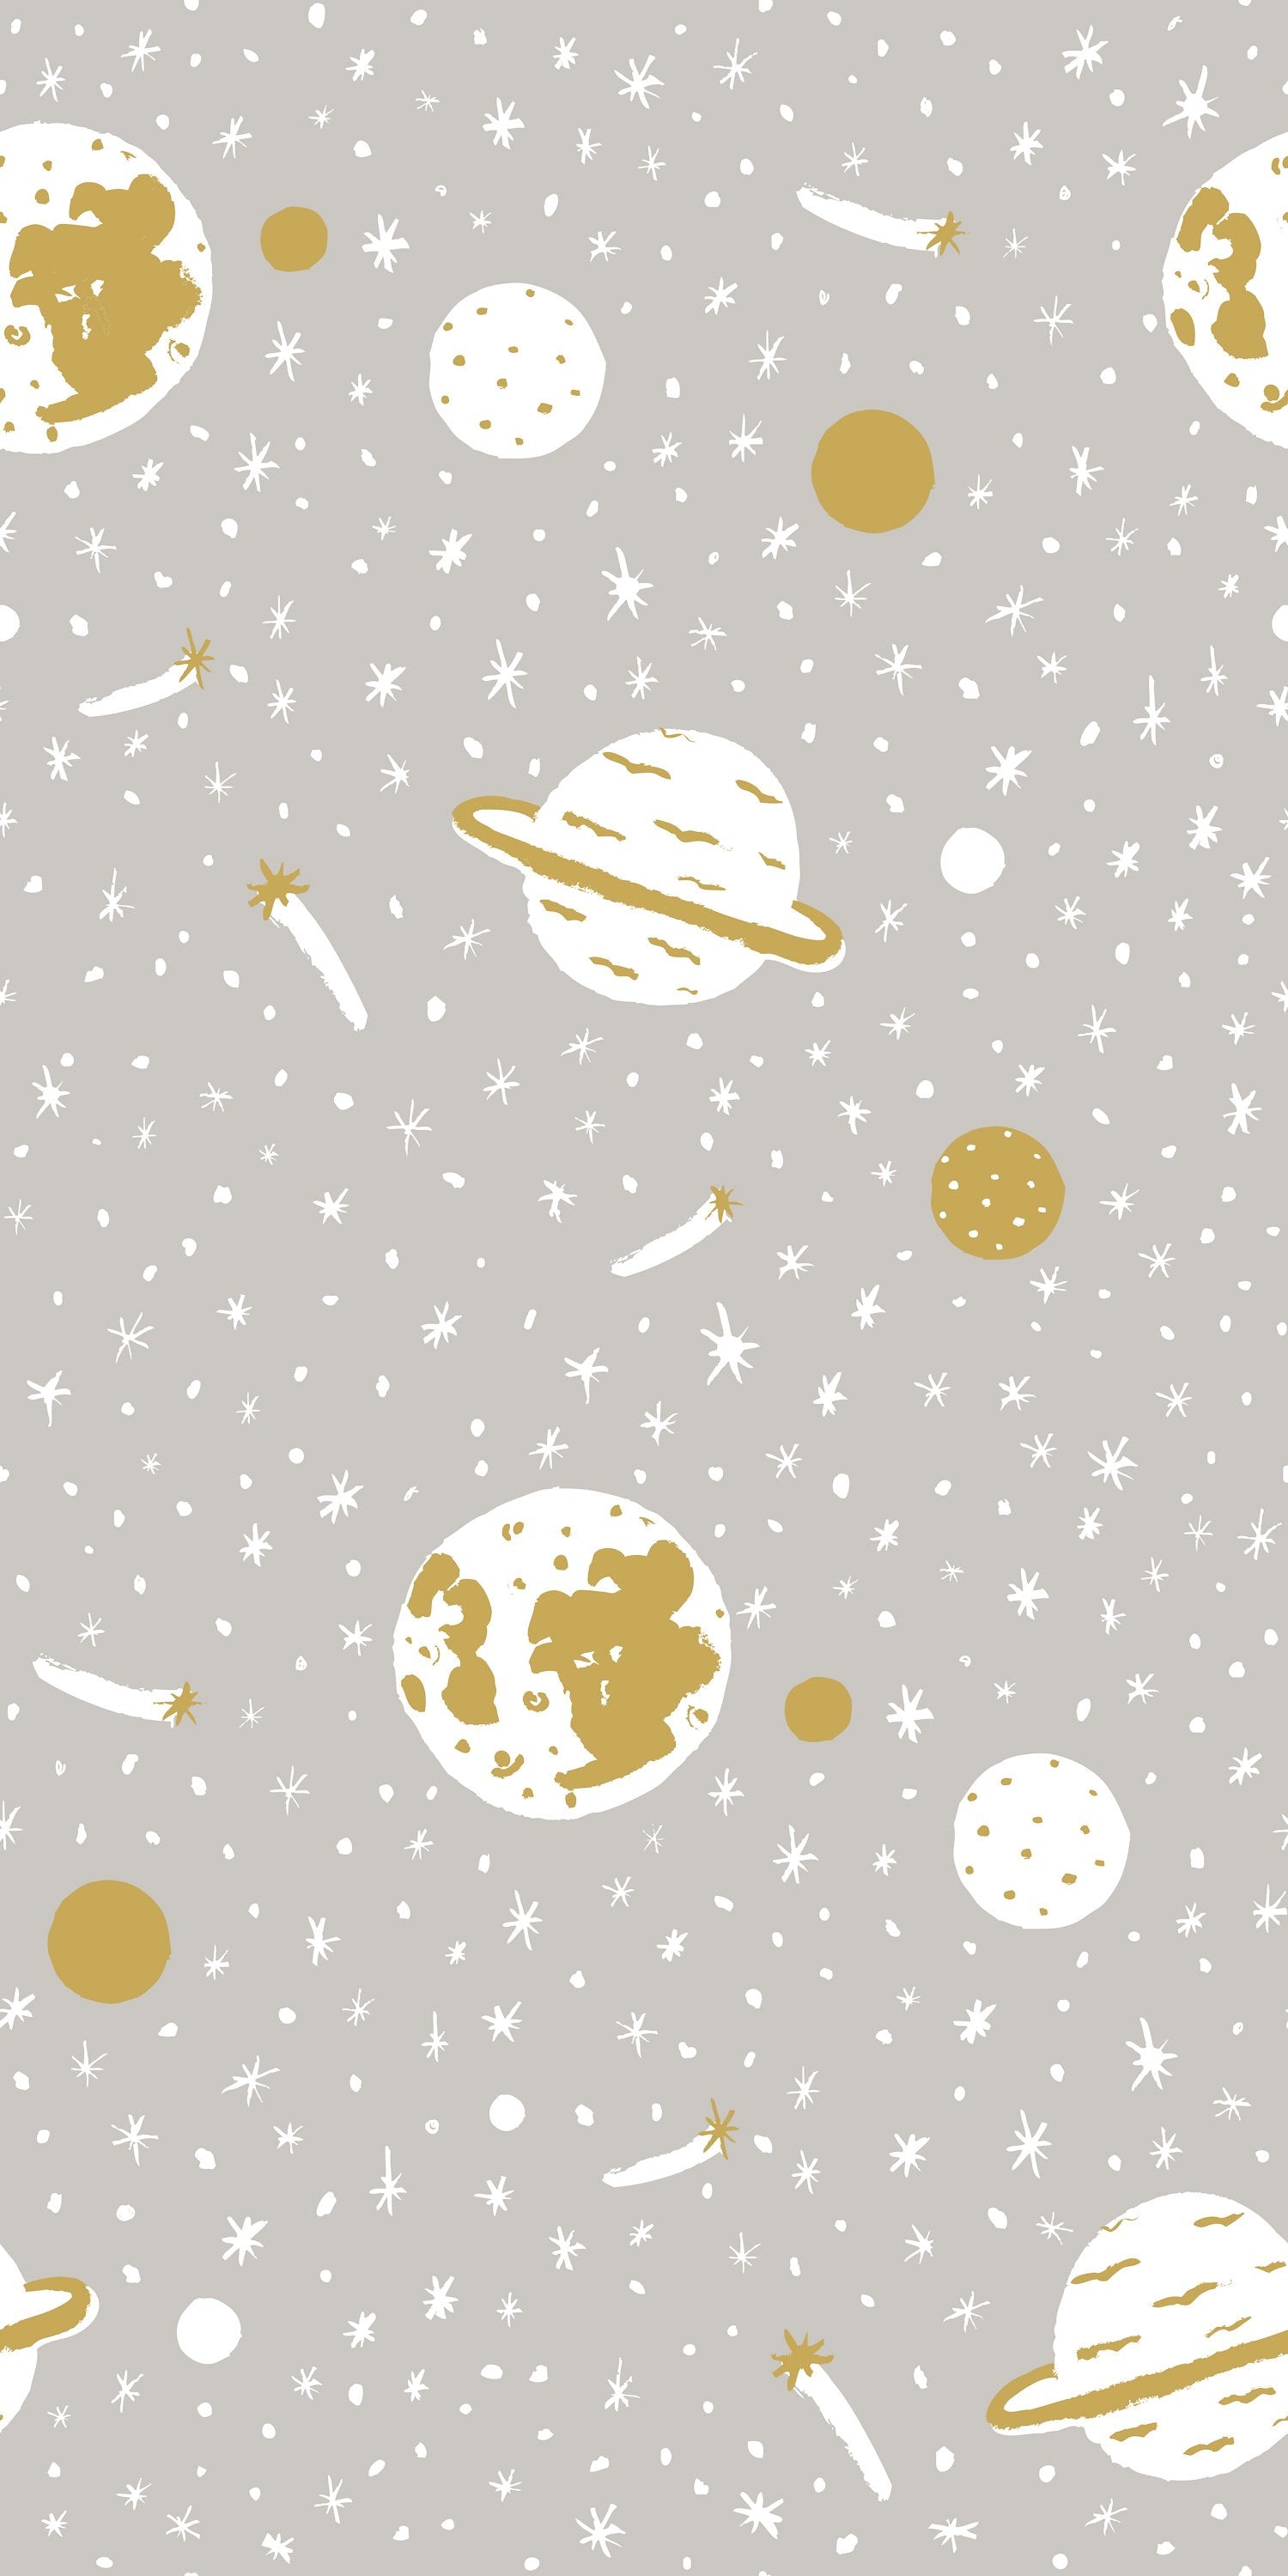 Cute Space Theme Wallpaper for Kids Room Blue  Grey  lifencolors